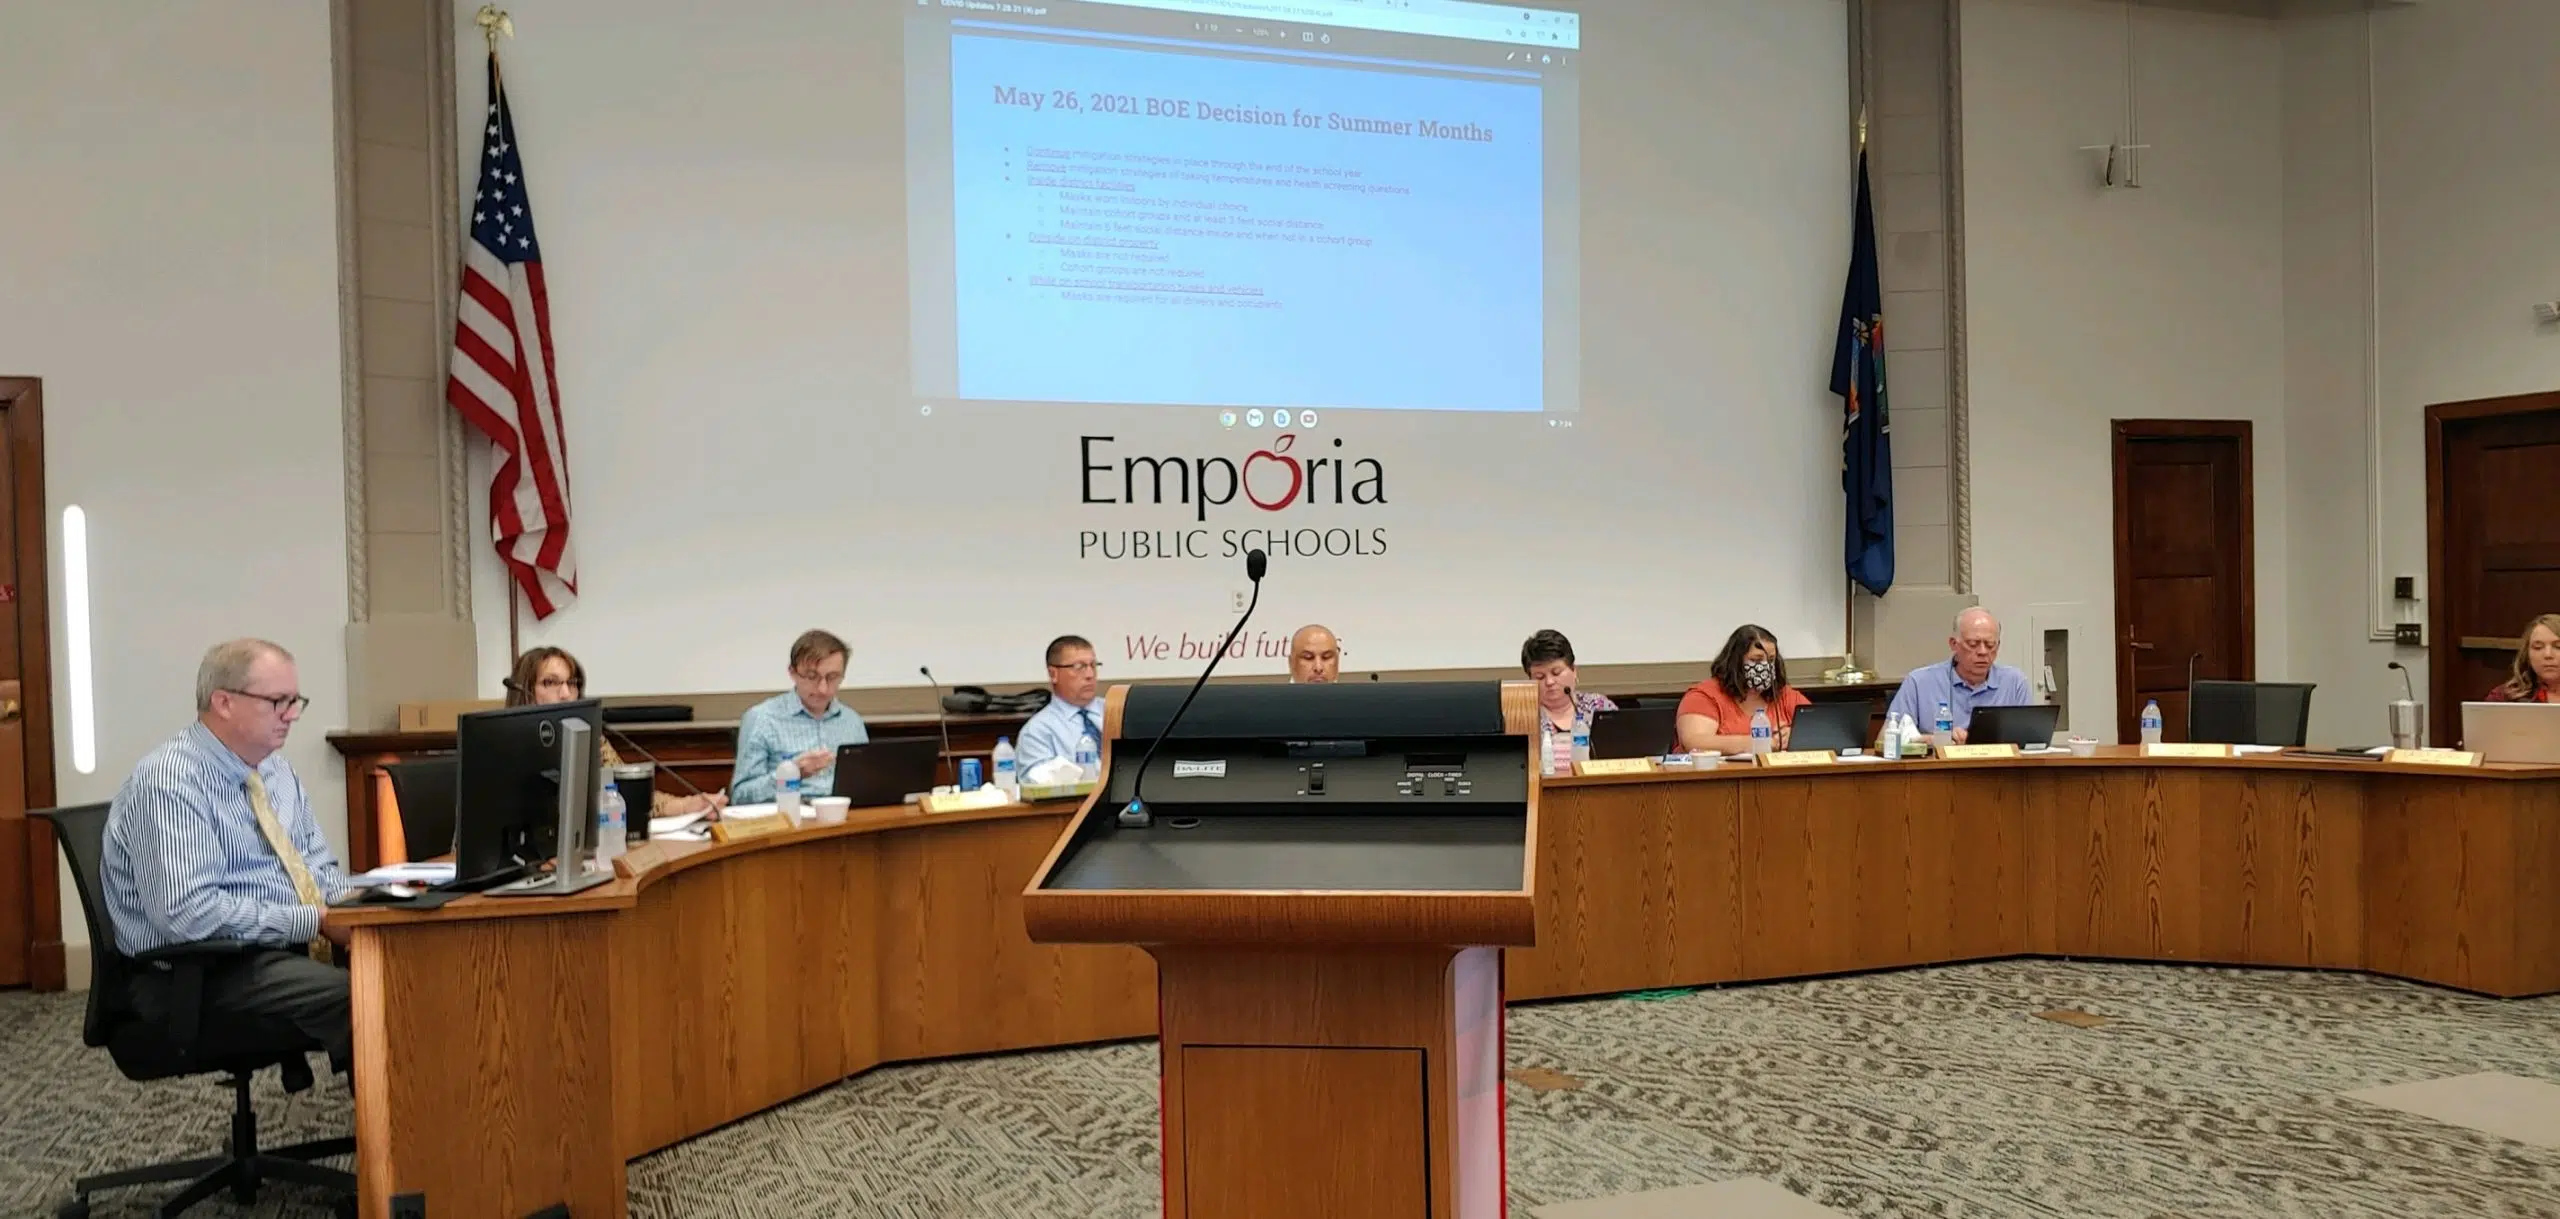 USD 253 Board approves mitigation policies for coming school year Wednesday evening